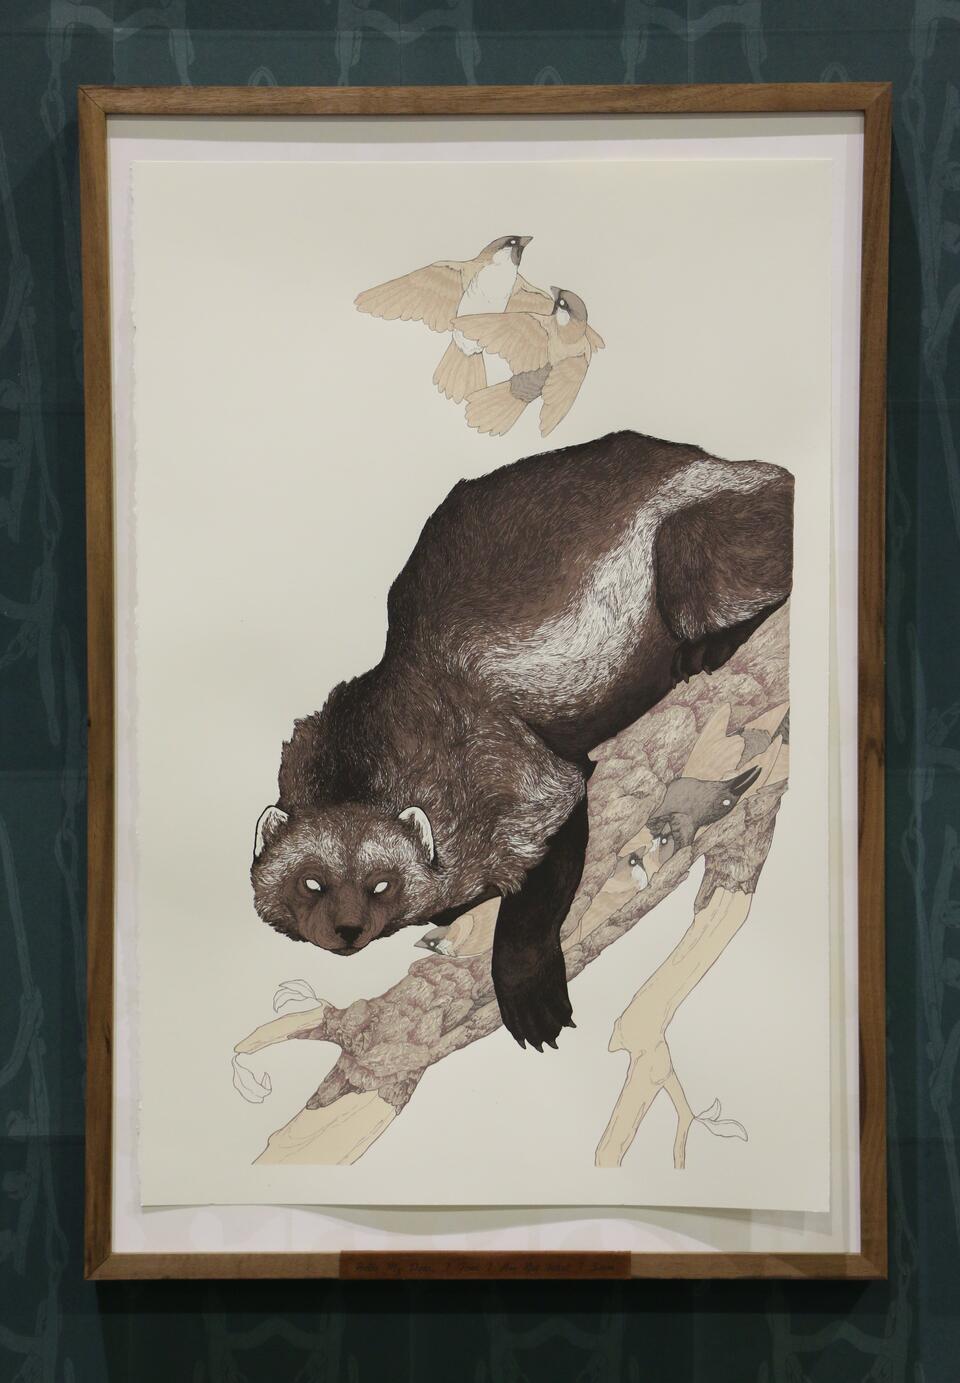 Screen print of a wolverine on tree branch, with sparrows above and below